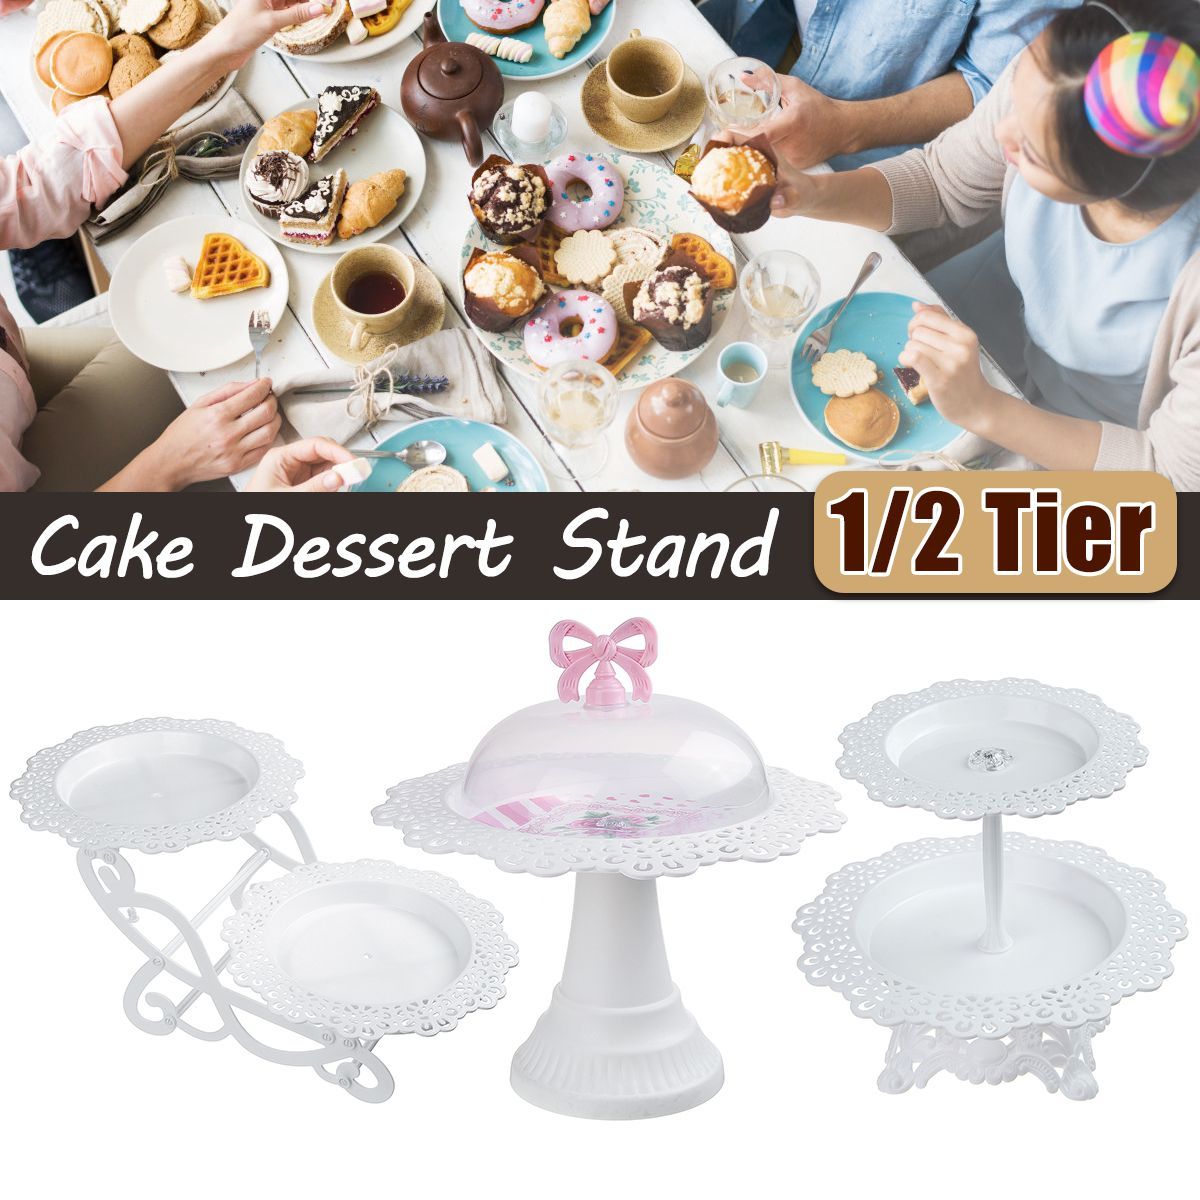 21-Tier-Cake-Dessert-Stand-Cupcake-Pastry-Cookie-Tray-Rack-Candy-Buffet-Holder-1691211